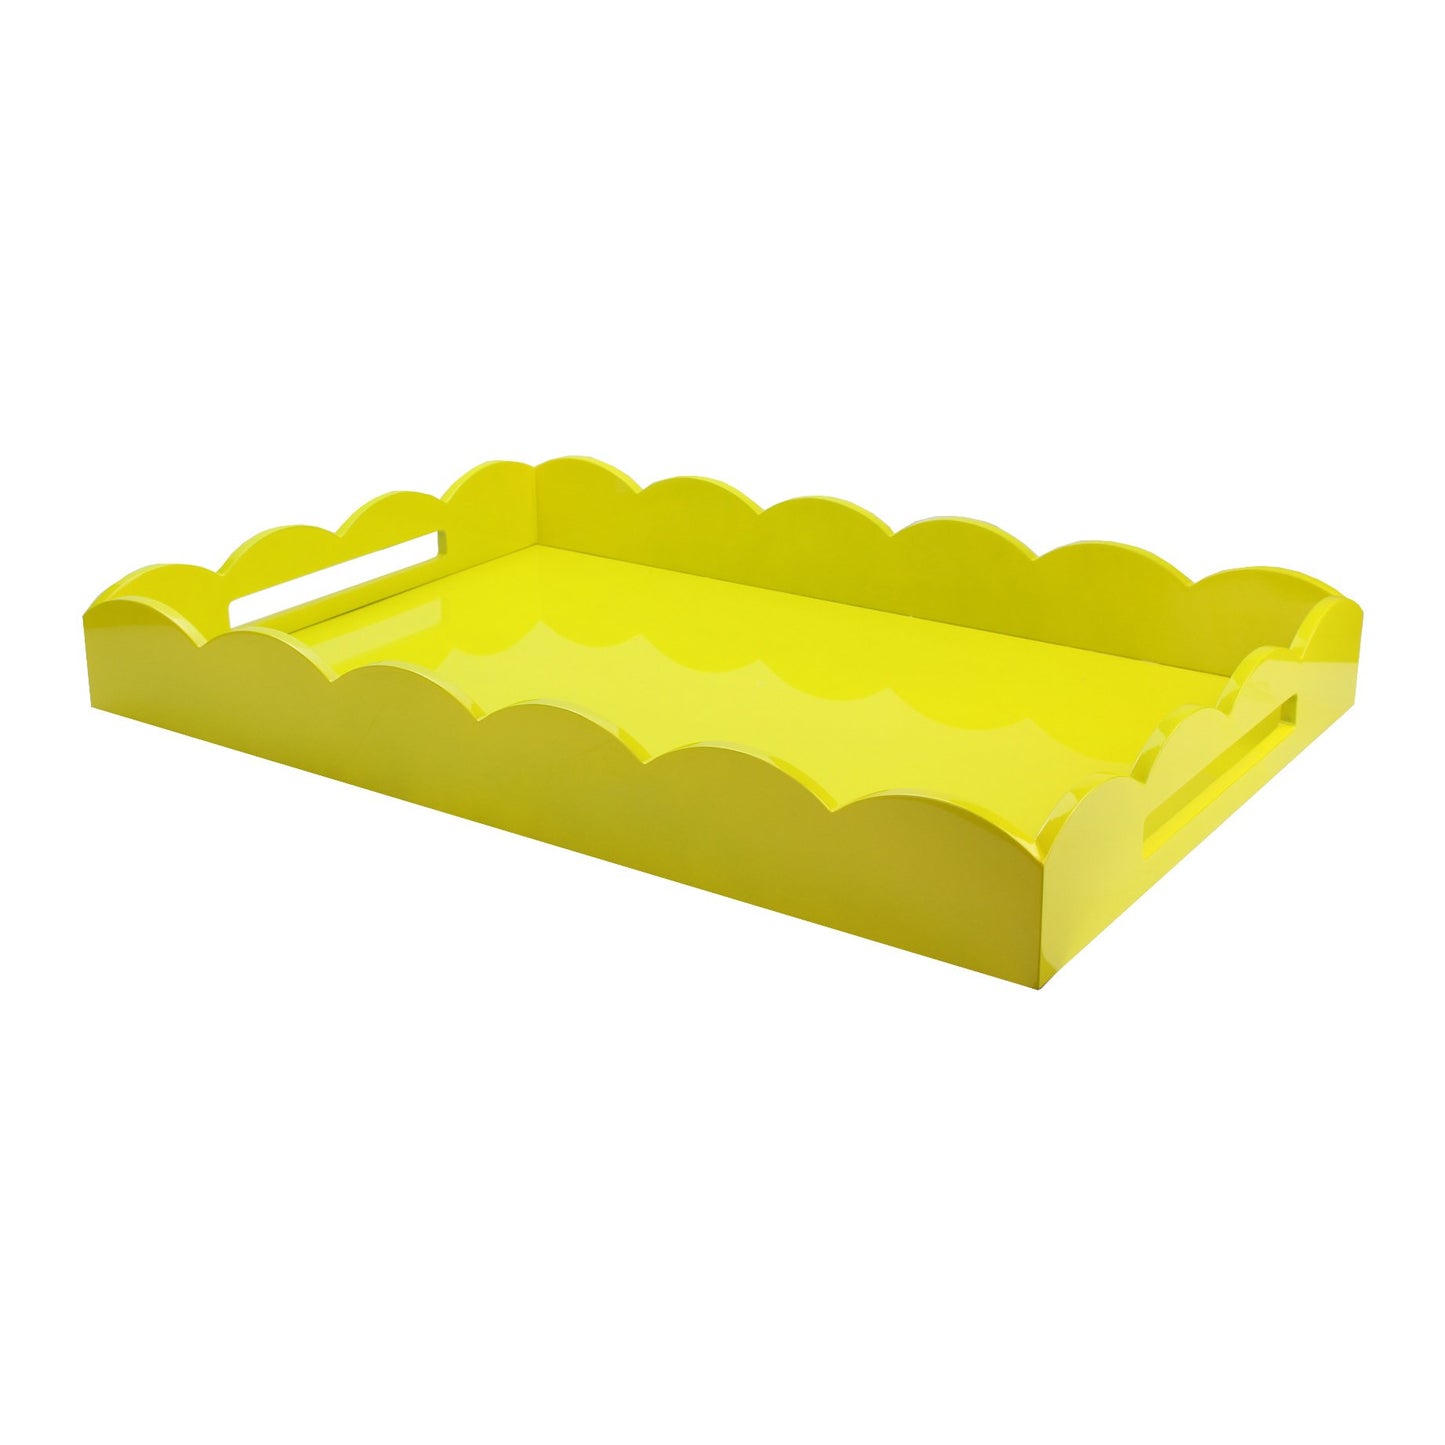 Large, yellow lacquer tray with scalloped edge